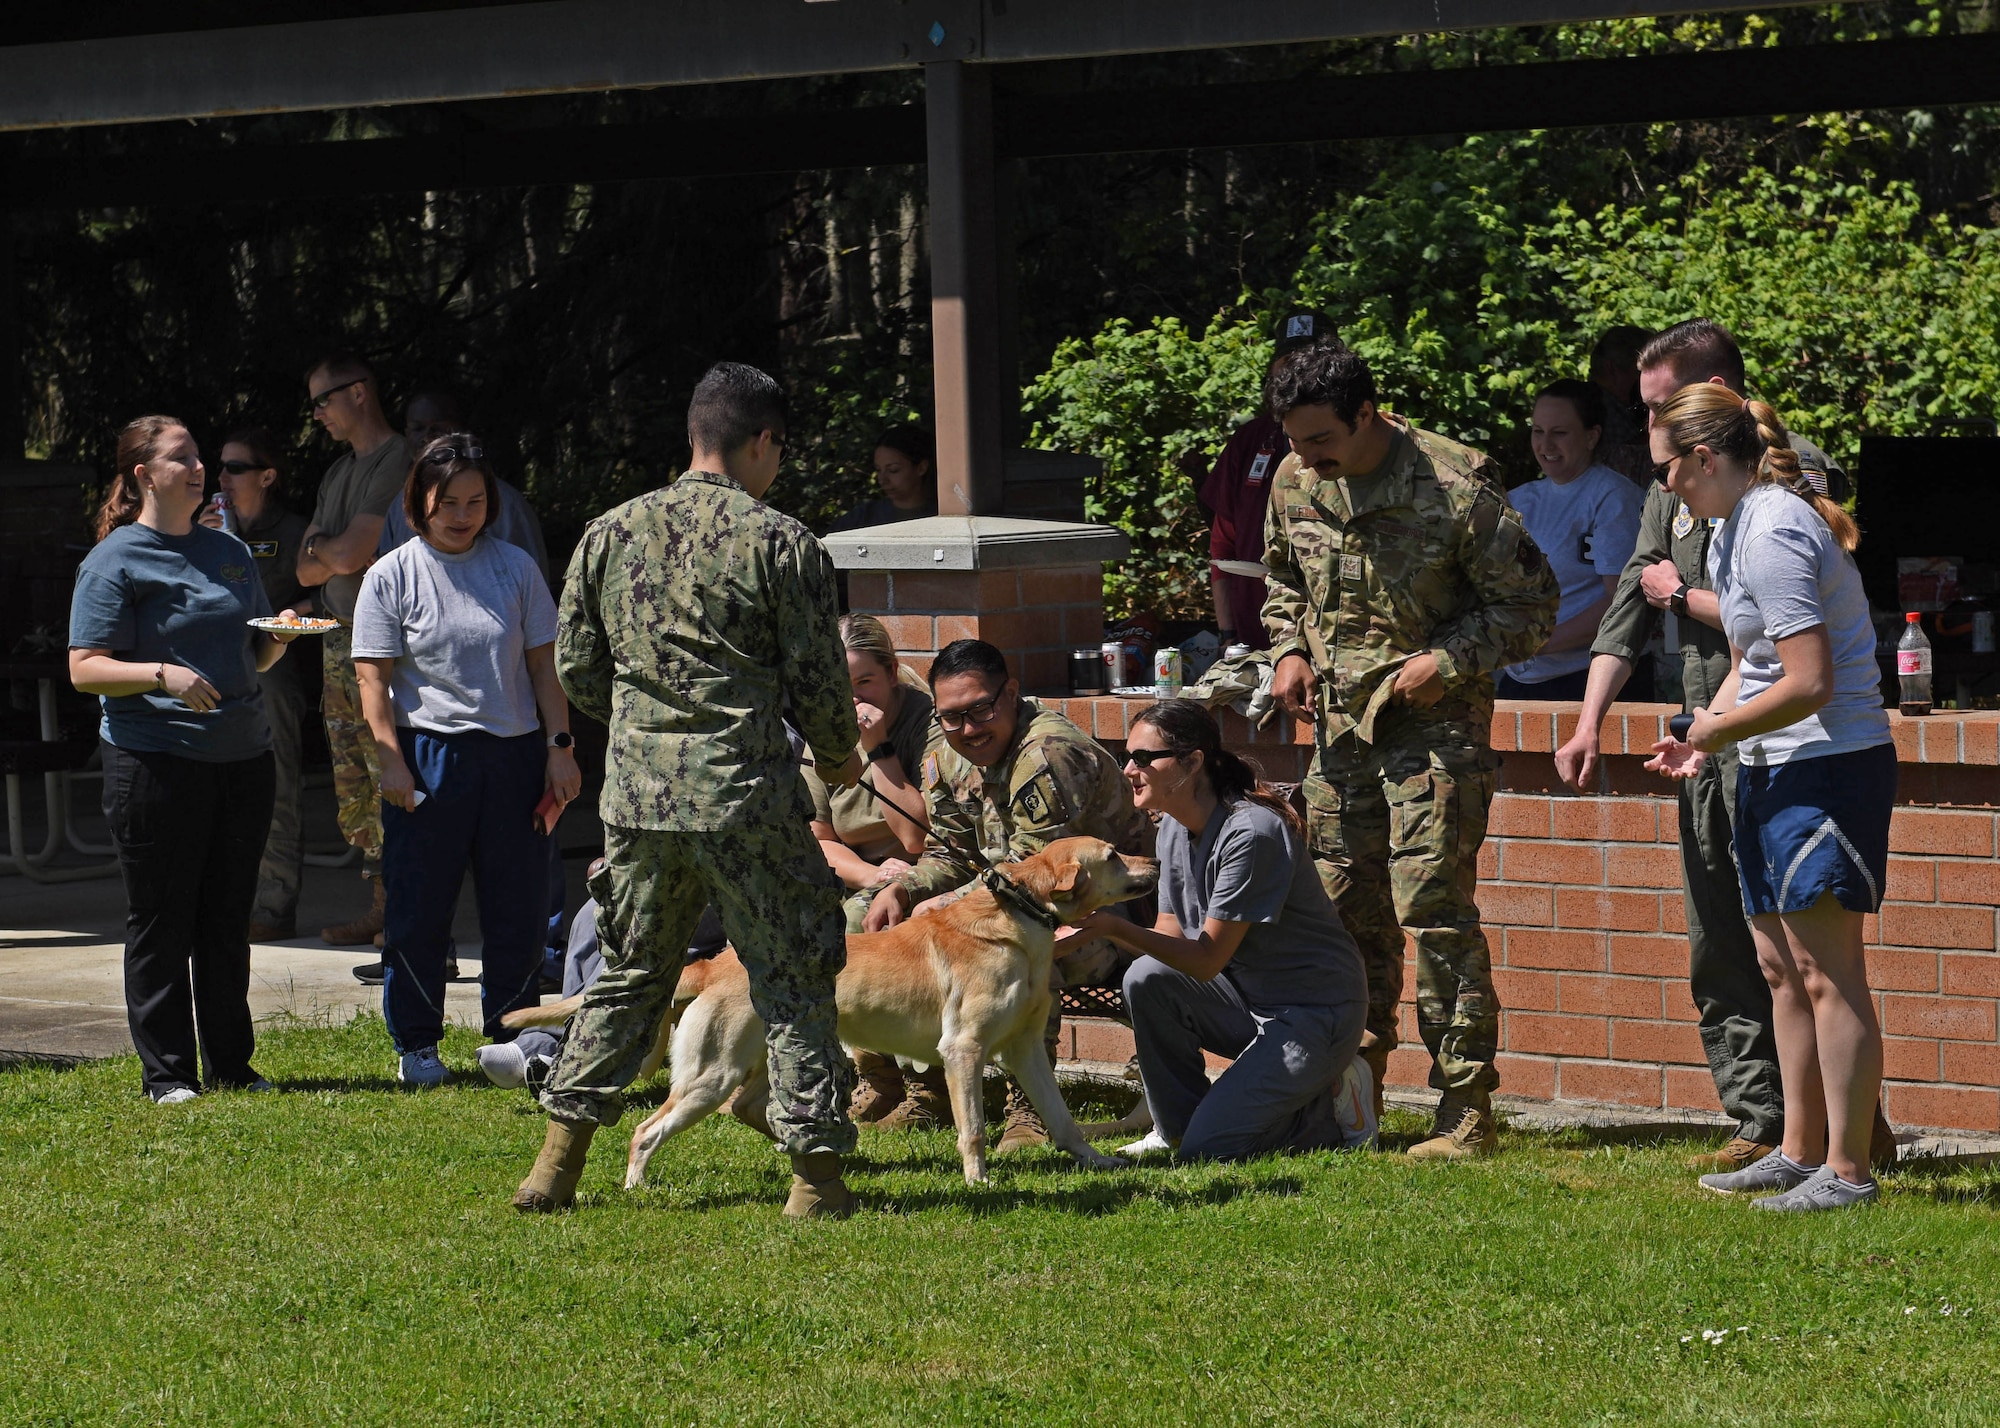 U.S. Air Force Airmen with the 62d Medical Squadron pet a military working dog during a K9 demonstration by the Naval Base Kitsap Security Department during Nurse-Tech Appreciation Week at Joint Base Lewis-McChord, Washington, May 10, 2023. The week’s purpose is to spotlight how nurses and medical technicians, whether uniformed, civilians, or contractors, exemplify excellence within the 62d MDS by providing quality healthcare services to promote fit, resilient, ready forces, while developing and strengthening their medics to sustain future medical capabilities. (U.S. Air Force photo by Staff Sgt. Zoe Thacker)